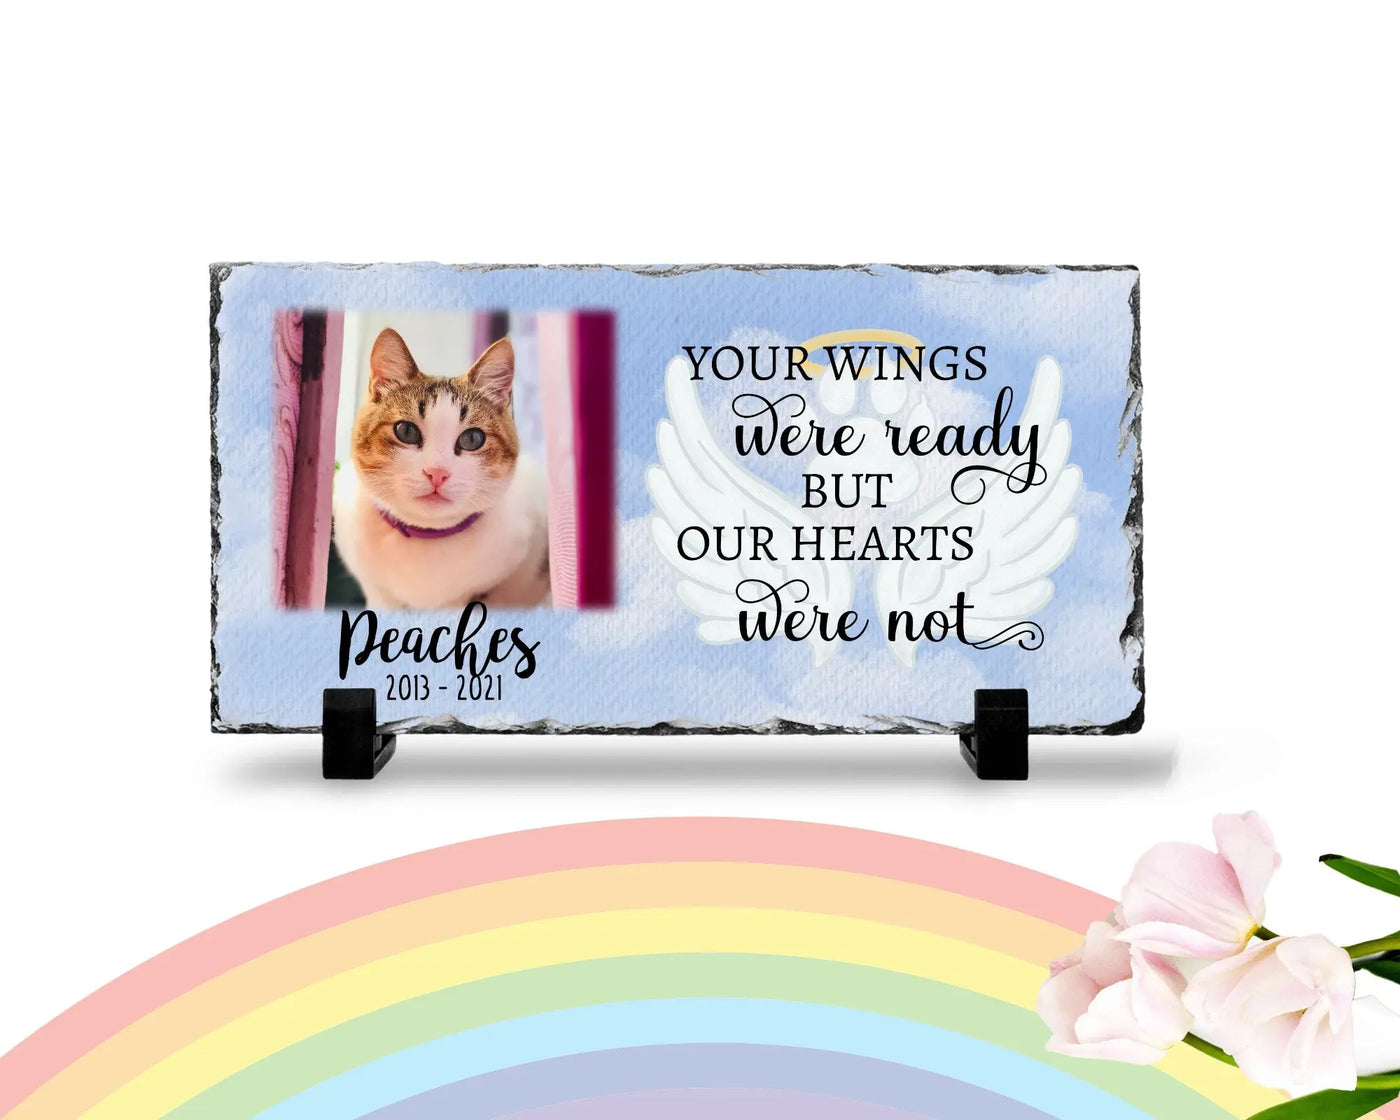 Personalized Personalized Cat Memorial Plaque Your wings were but our hearts were not  Personalized Picture Keepsake Memorial Slates